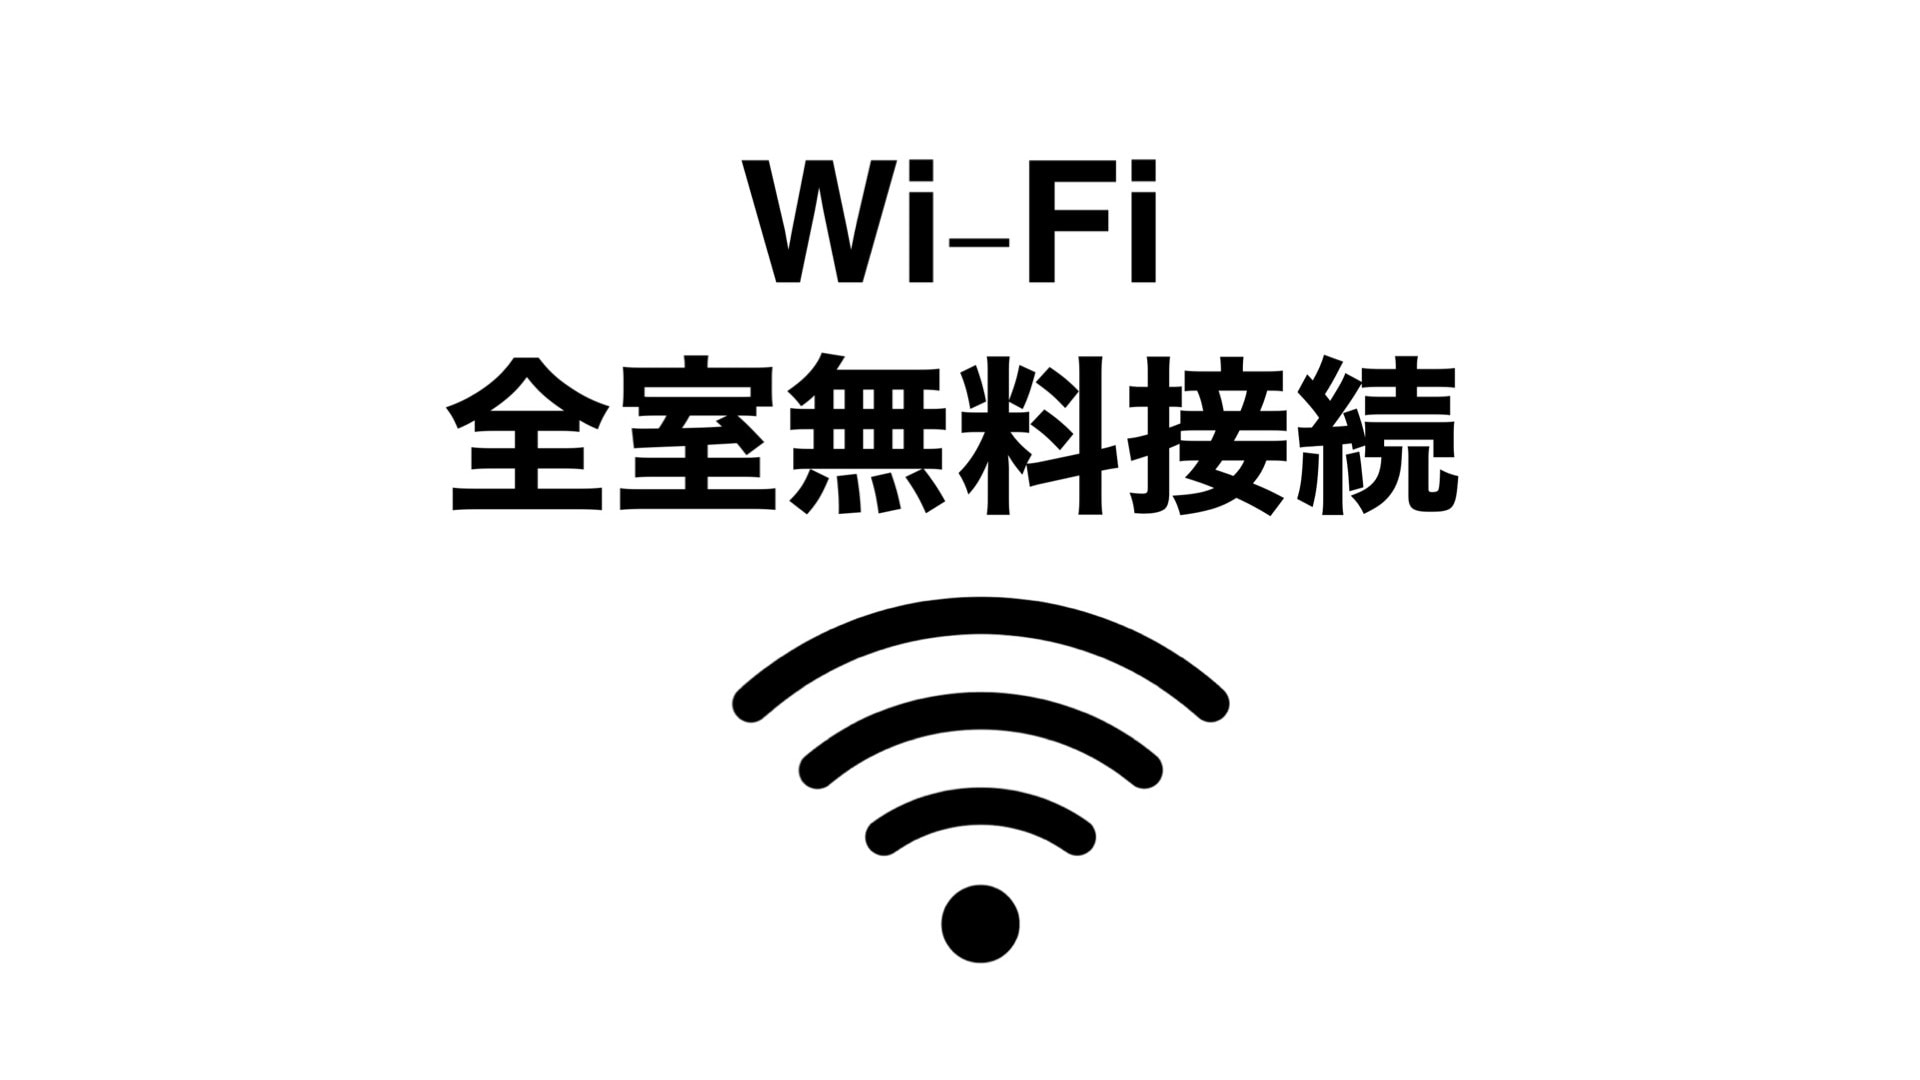 * You can use Wi-fi for free in both the new building and the main building! (Wired LAN is also available only in the main building)